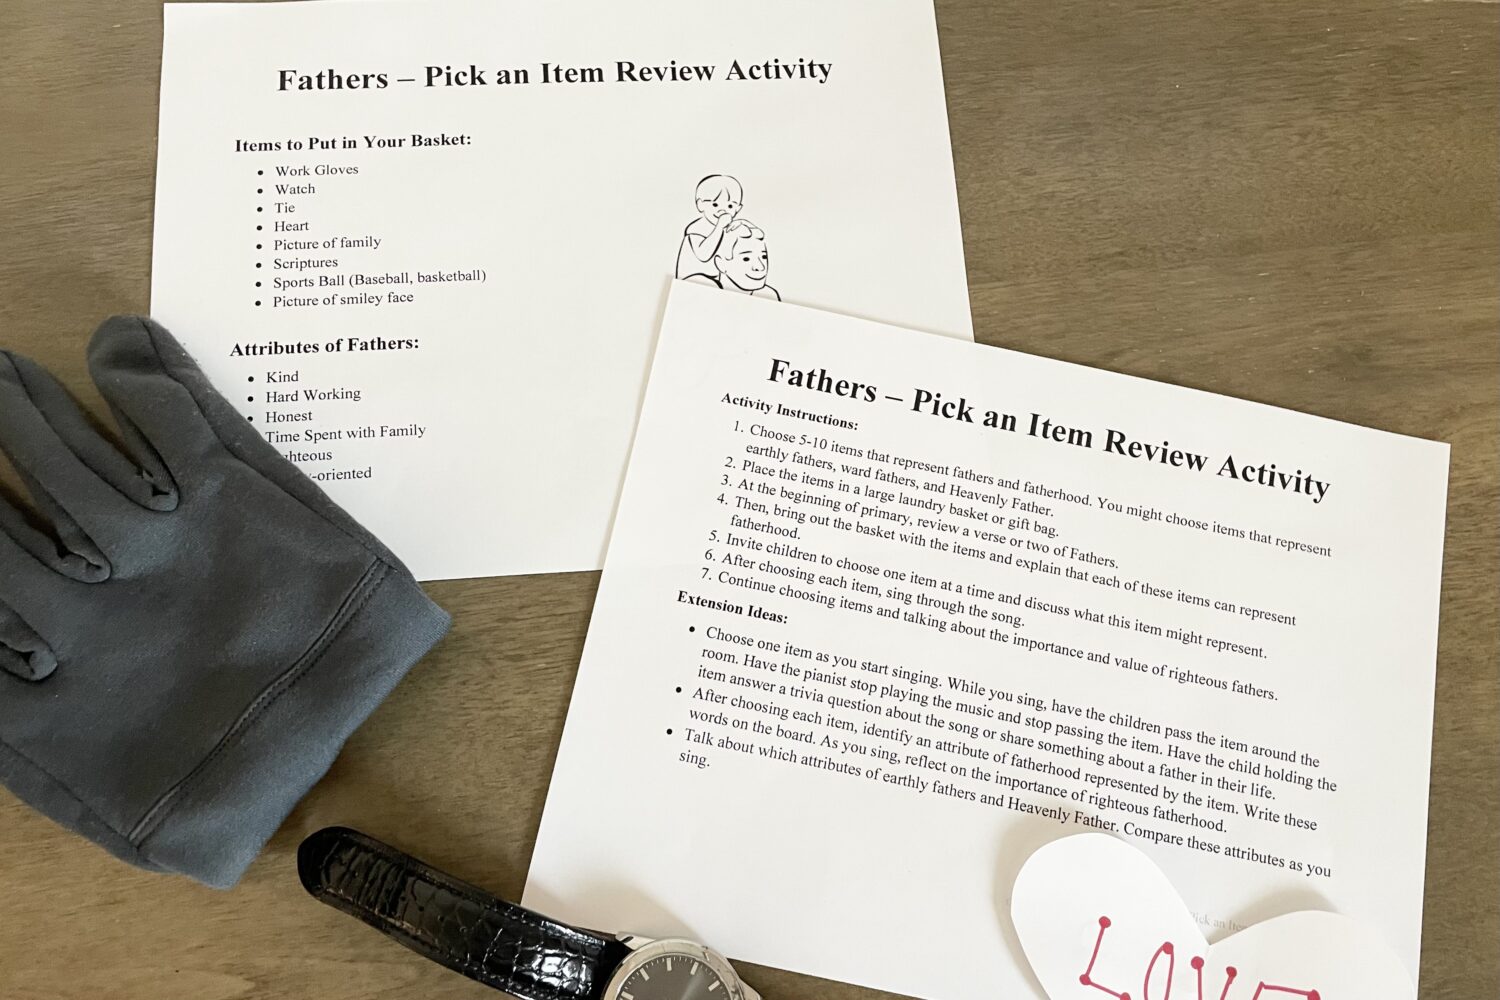 Fathers Song Pick an Item singing time activity! Discuss how each item represent the song and Fathers!